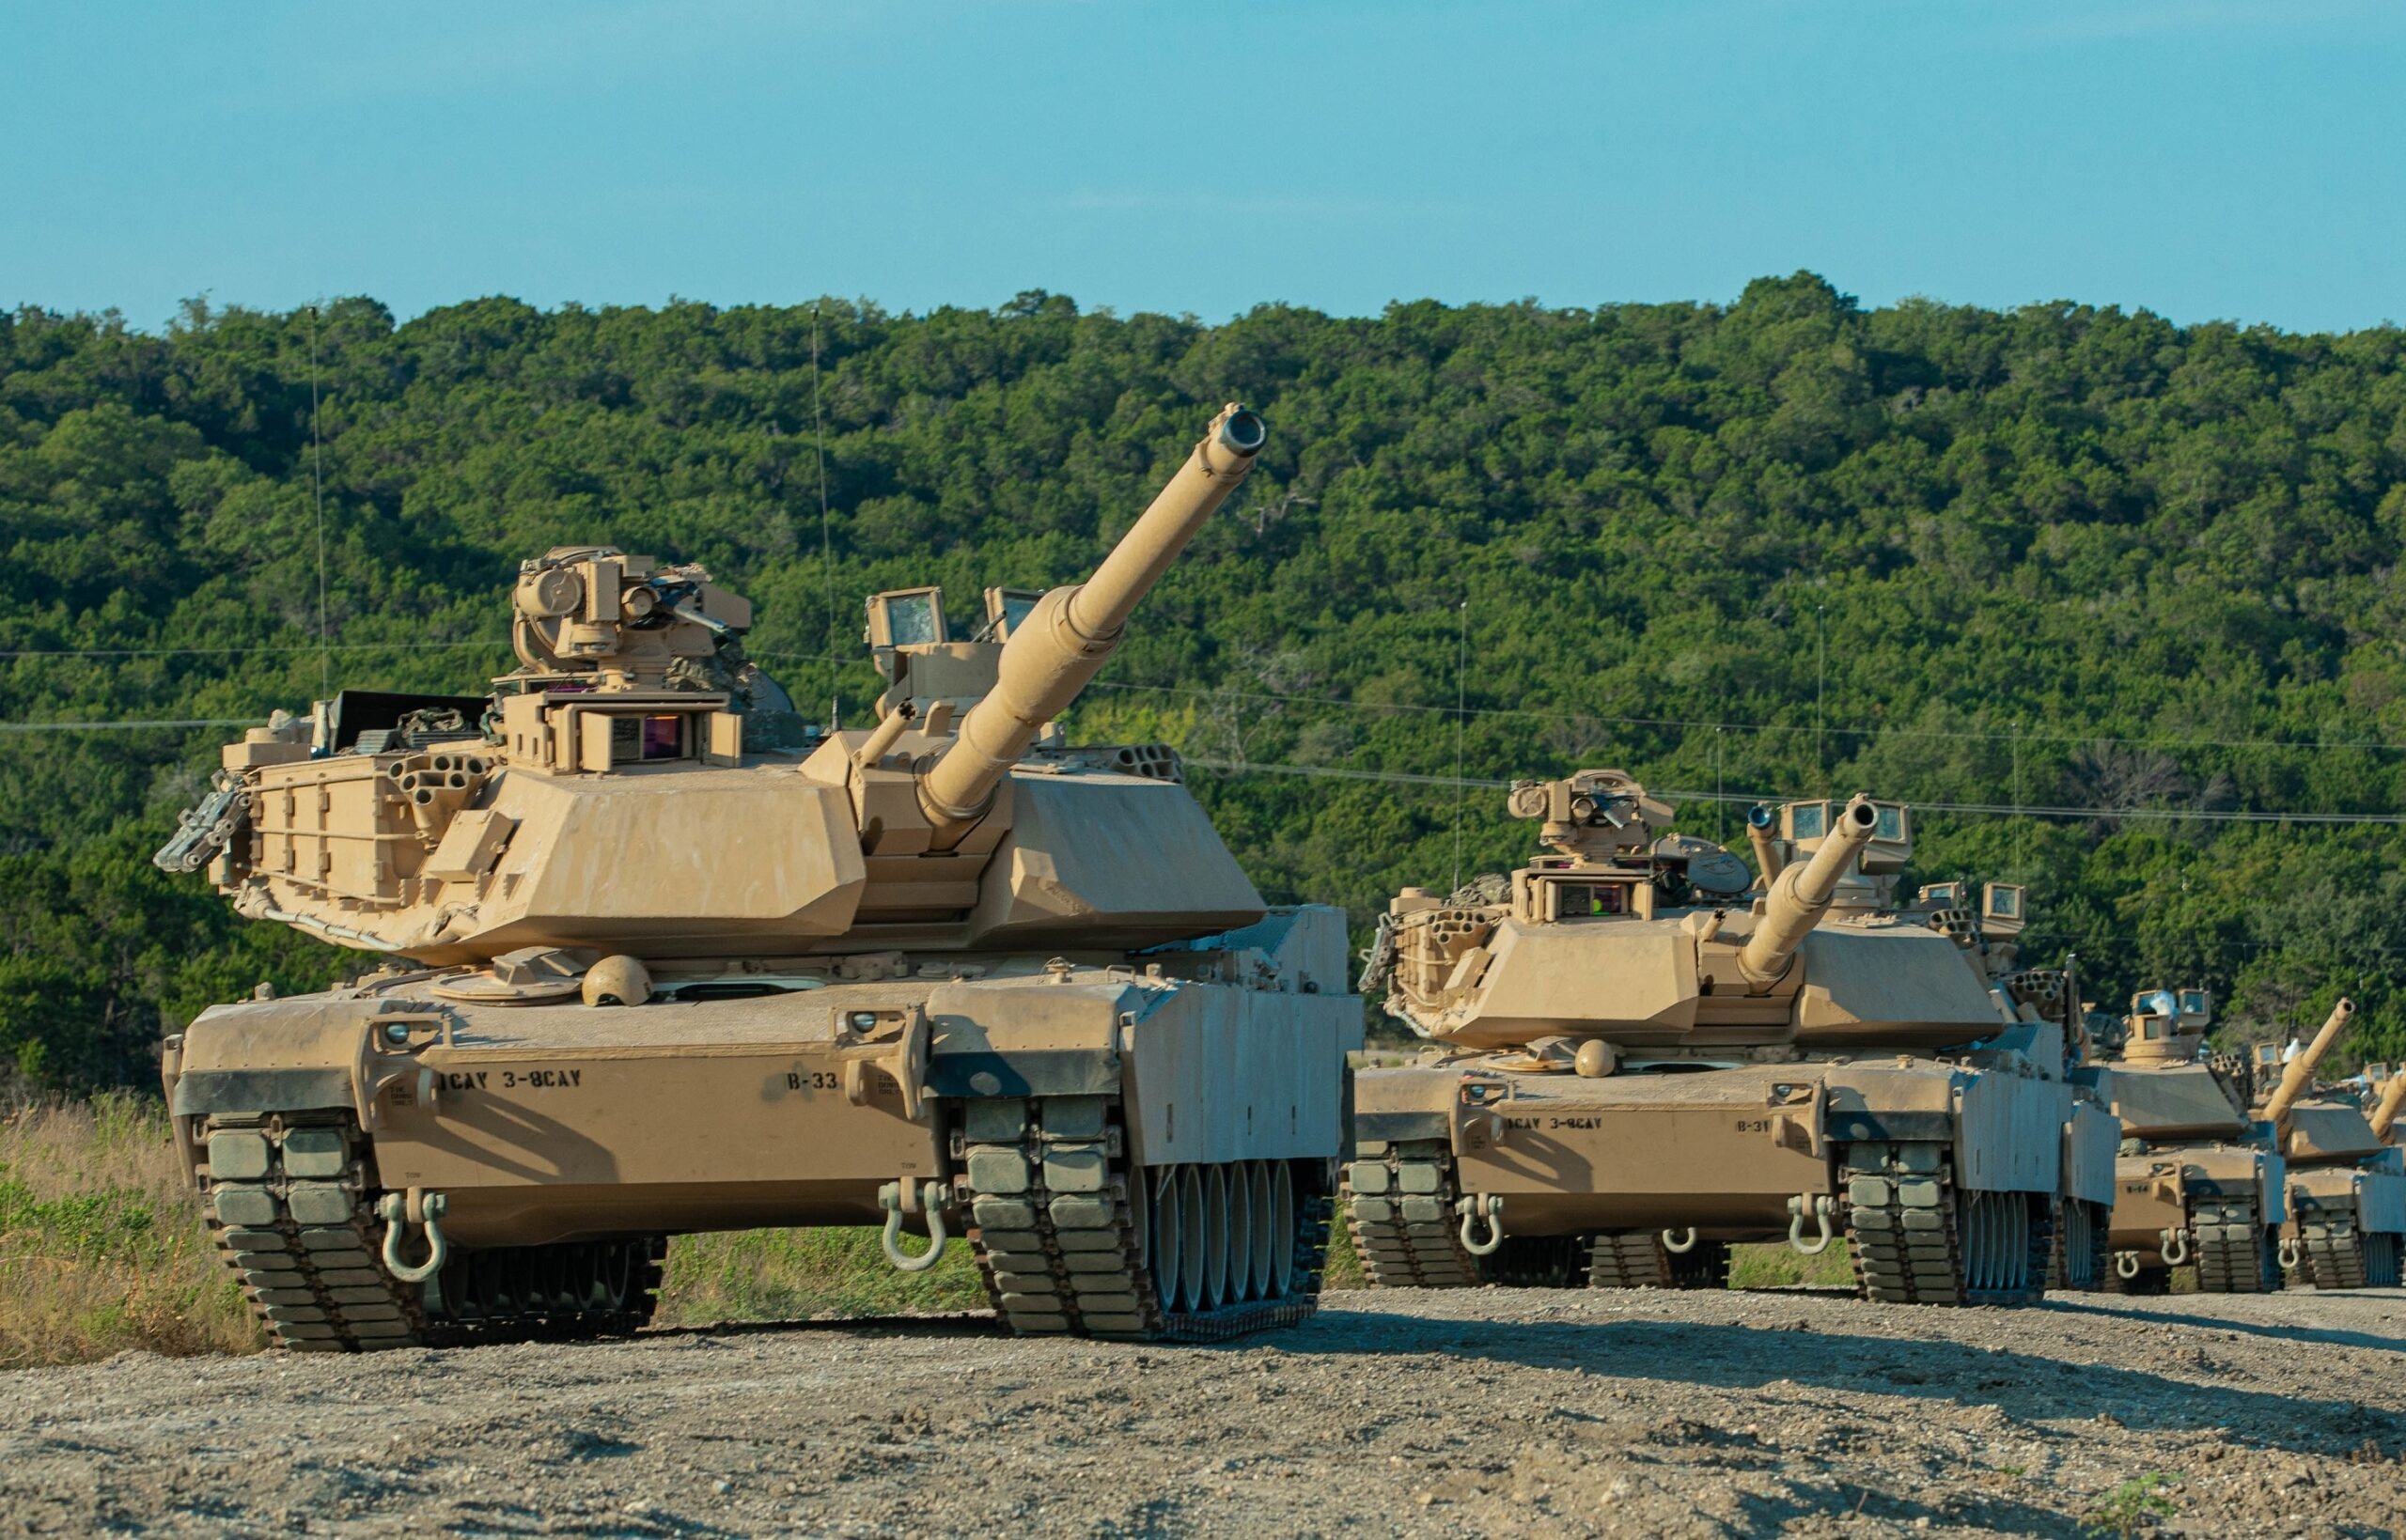 U.S. Army awards $4.6 billion contract for newest M1 Abrams tank ...